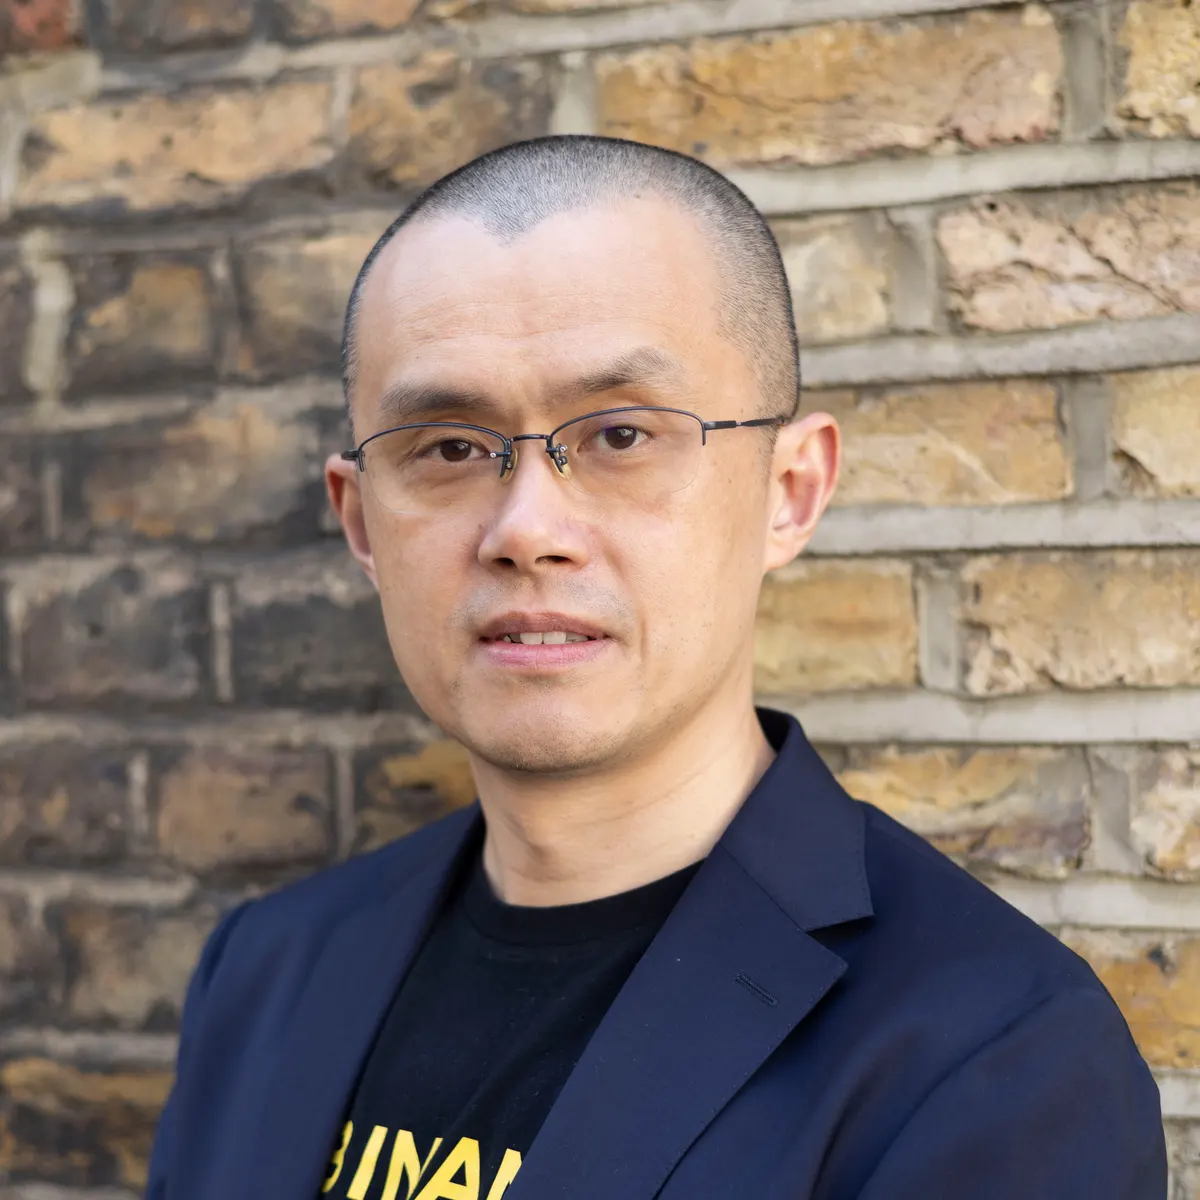 Cz-says-departed-binance.us-ceo-just-needed-a-break